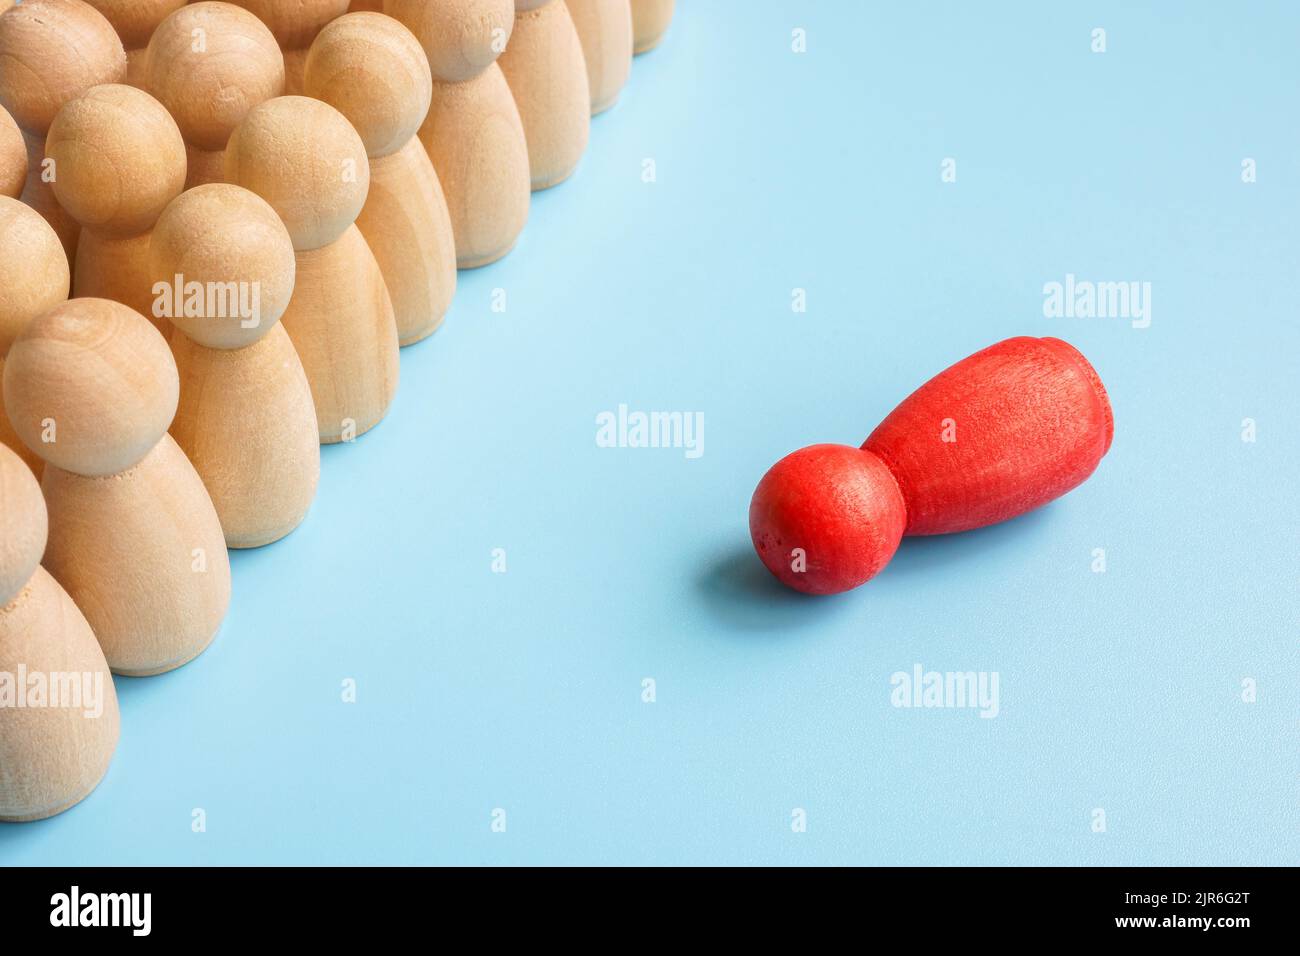 Social inclusion and equality abstract. A number of figurines and one red lies. Stock Photo